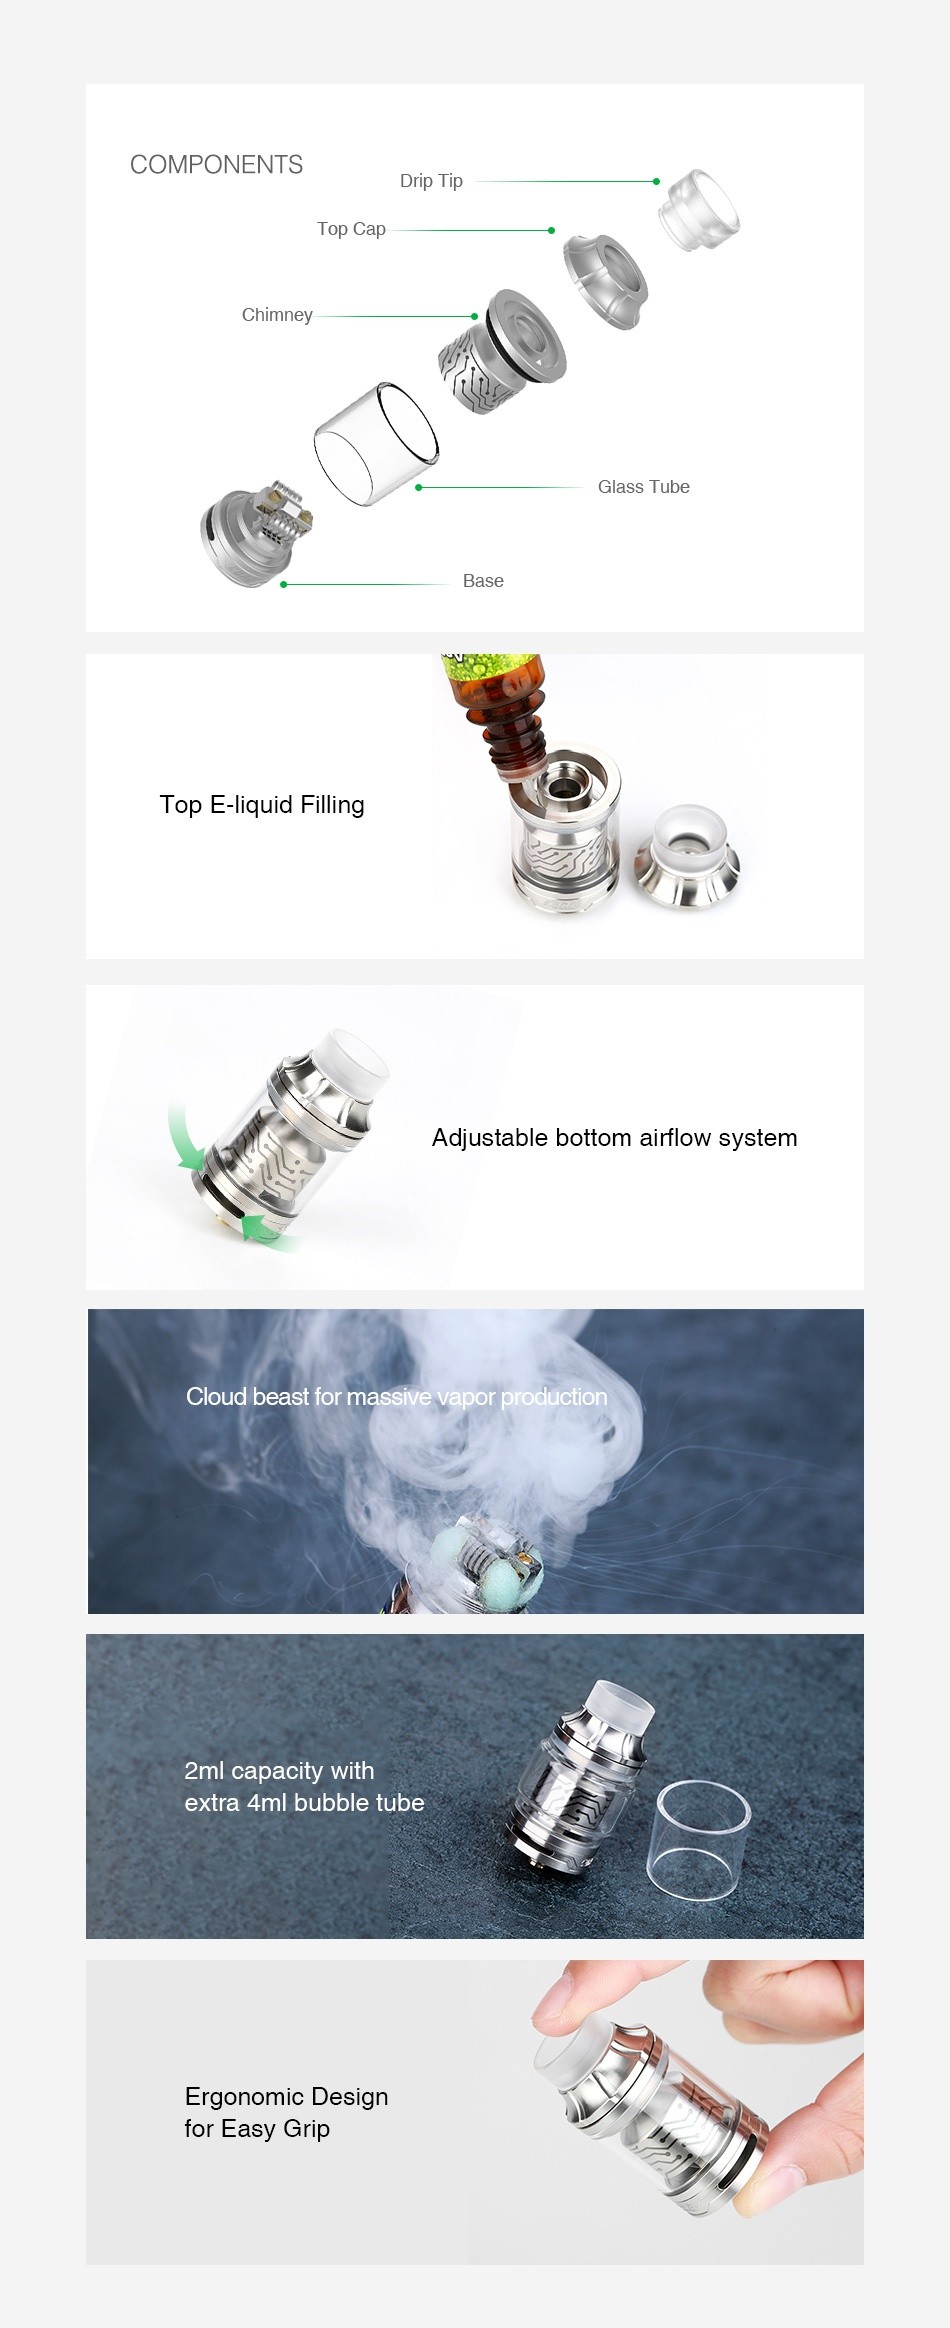 Vapefly Core RTA 2ml COMPONENTS Drip I ip Top Ci Chimney ass Tube Basc Top E liquid Filling Adjustable bottom airflow system Cloud beast for massive vapor production 2ml capacity with extra 4ml bubble tube Ergonomic Design for easy g